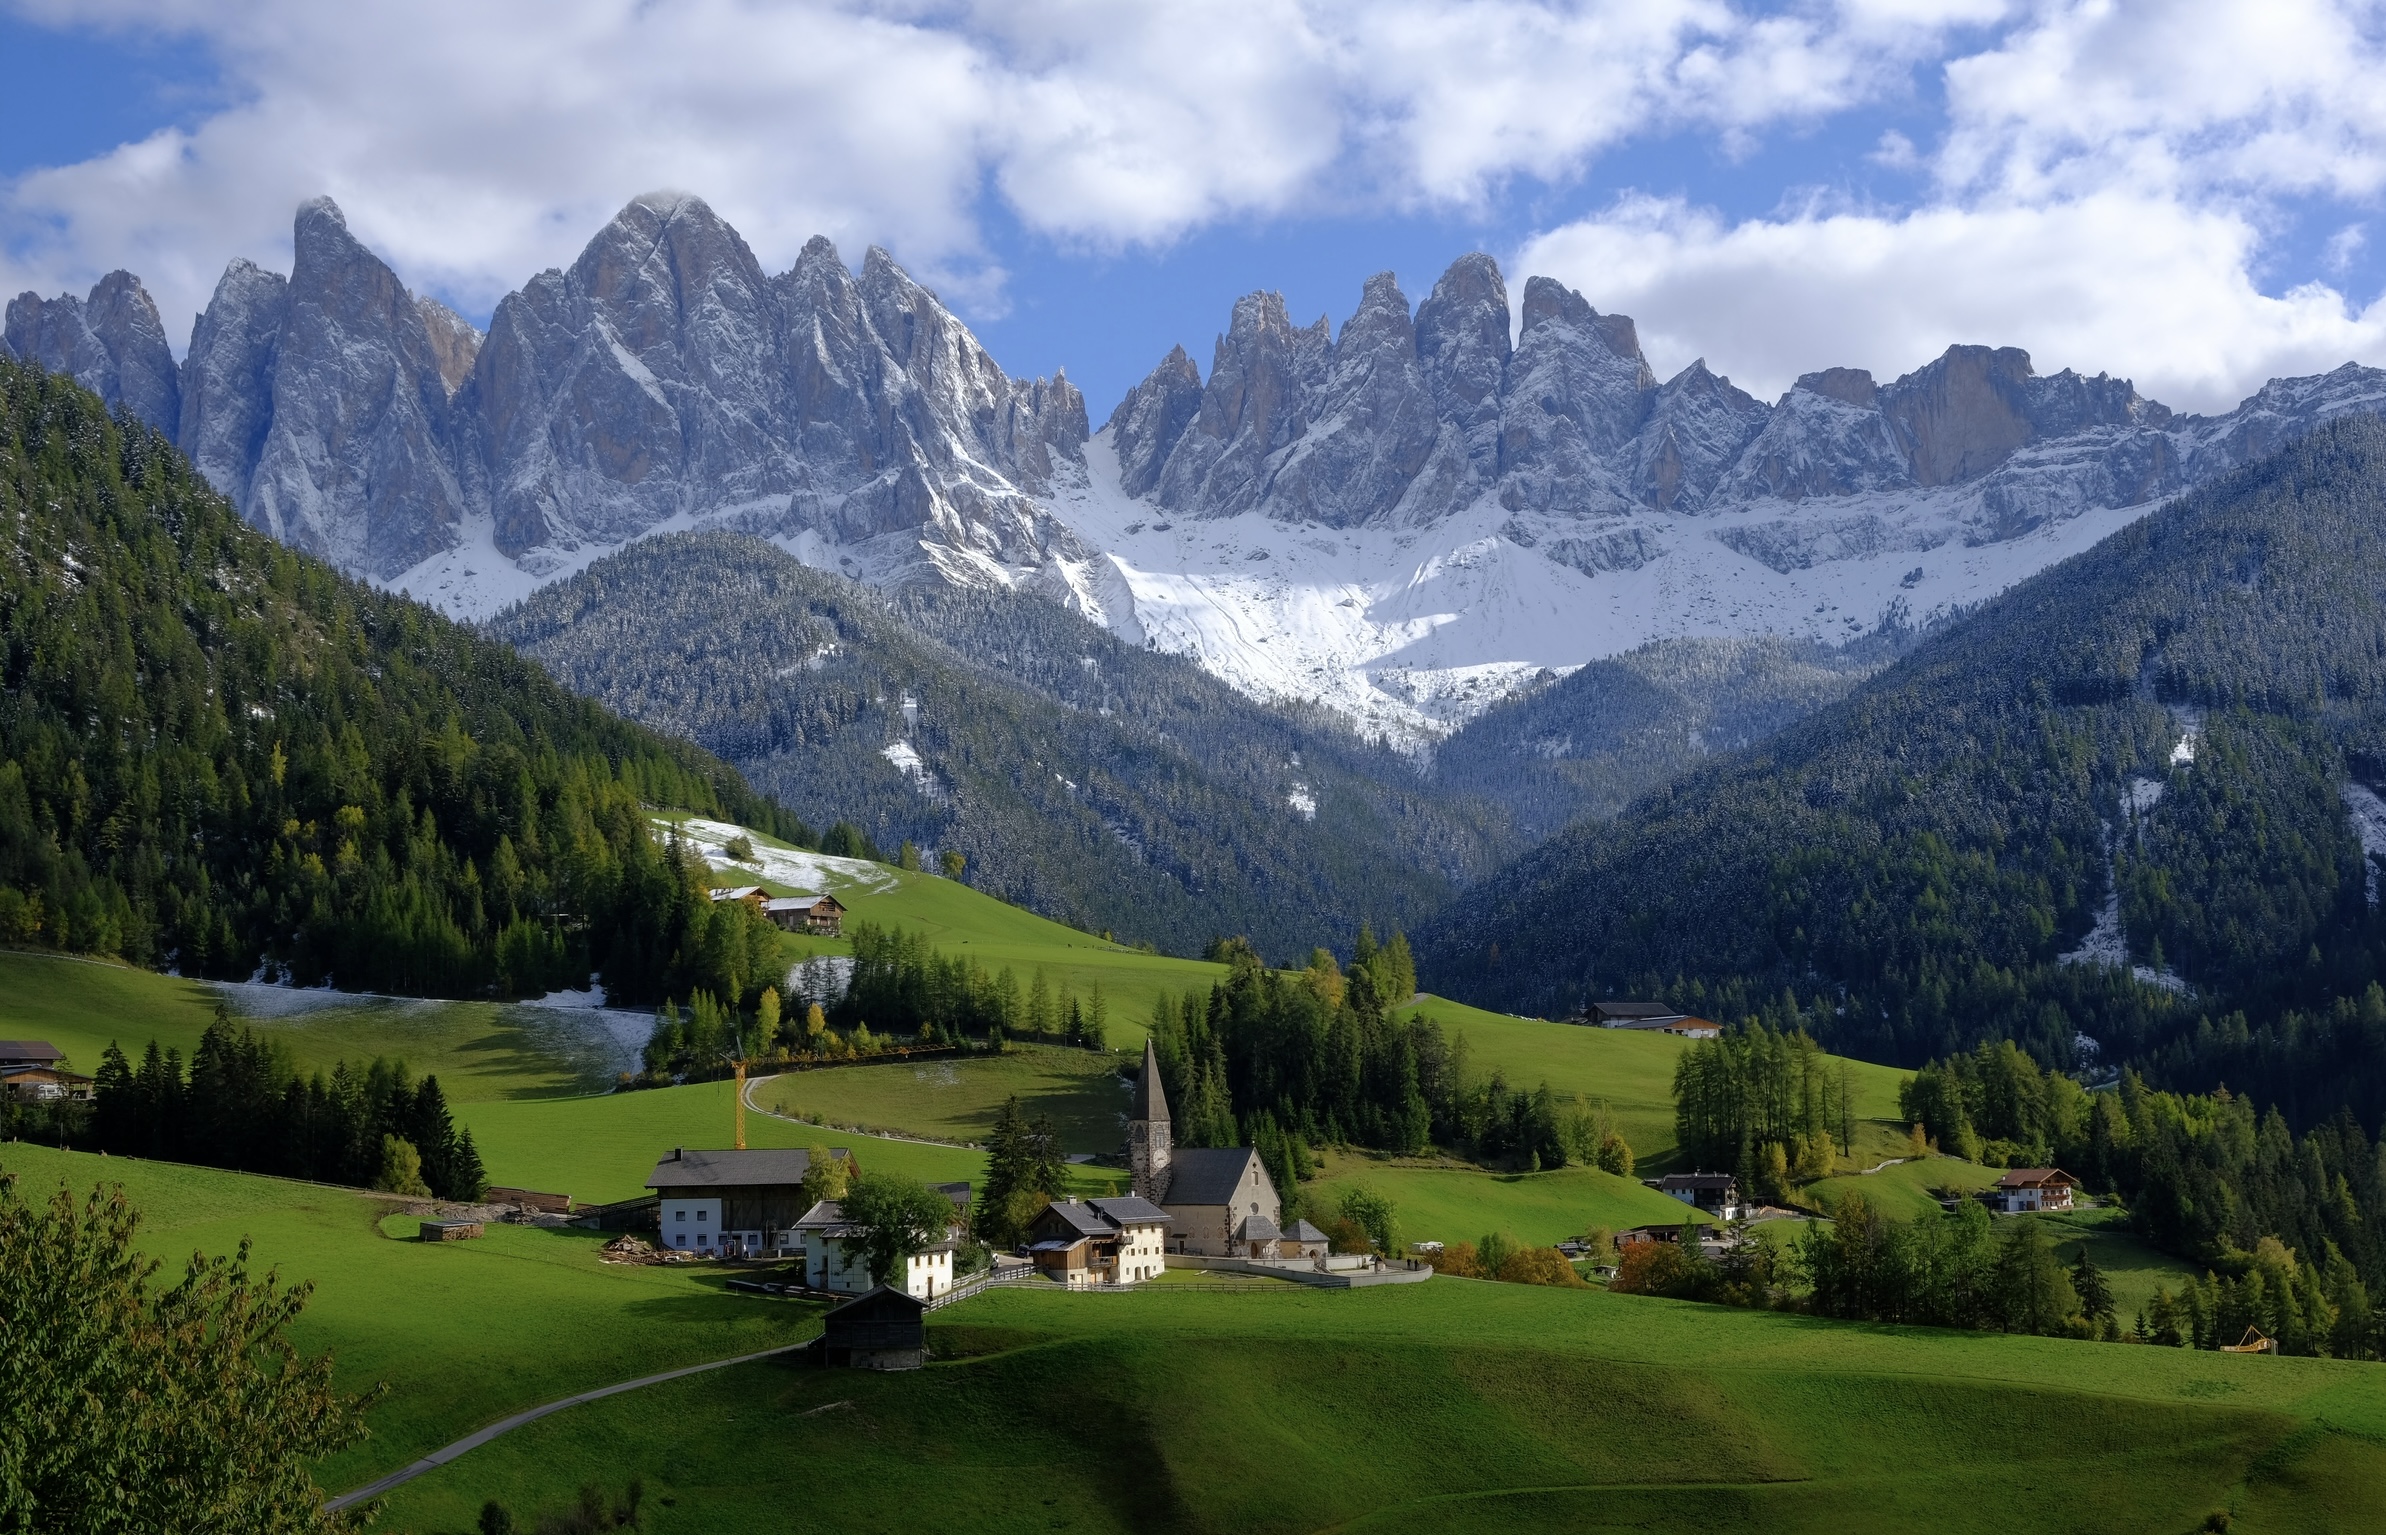 Val Gardena is an area near the Dolomites that many visitors love to stay in. 
Pictured: The lush green valleys of the Dolomites with snowy jagged mountains in the background